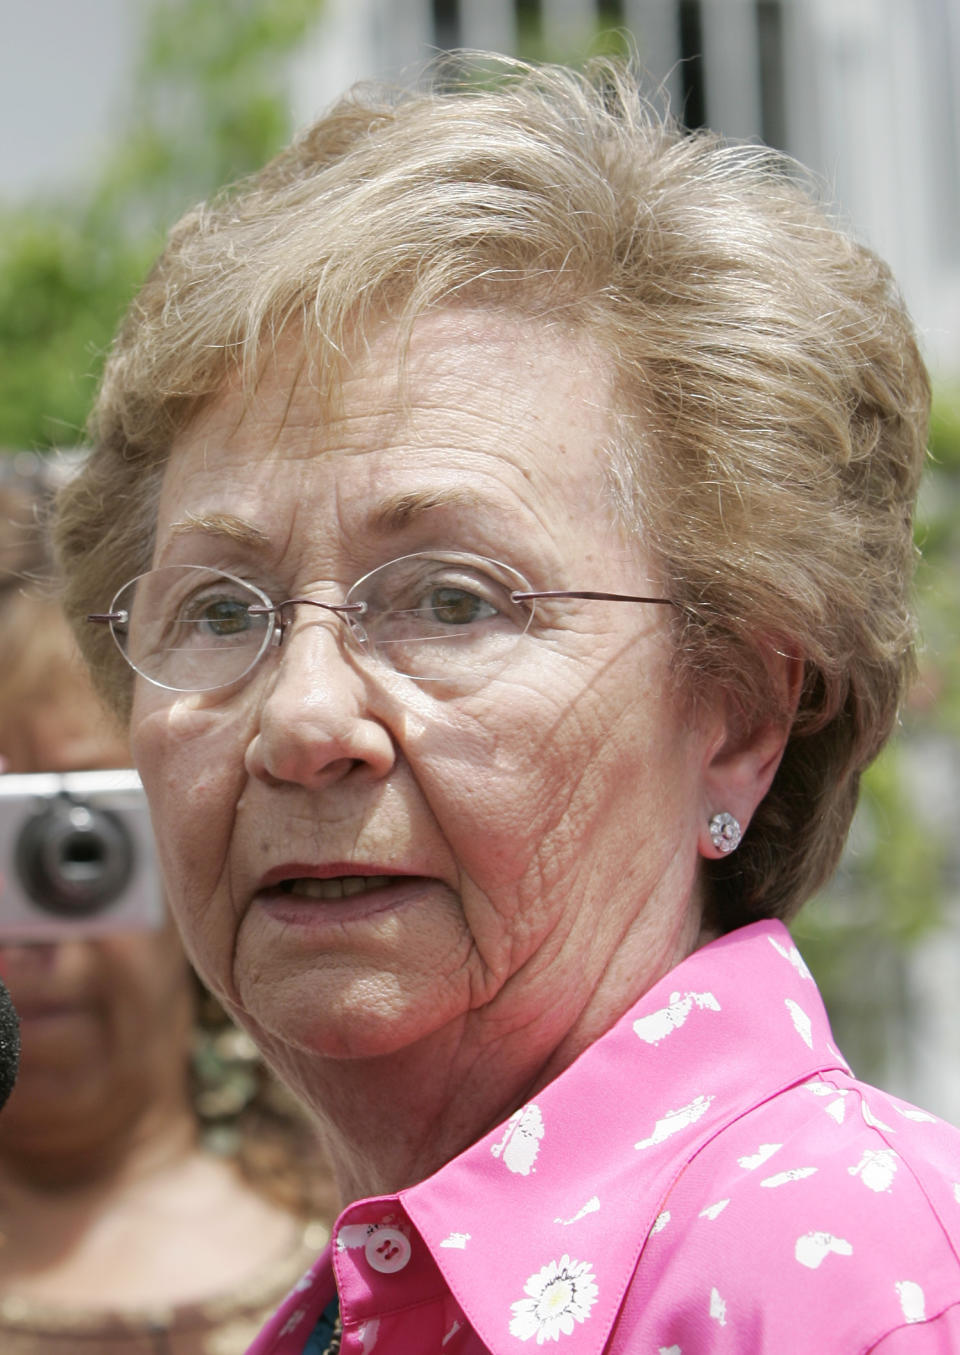 FILE - Juanita Castro, the sister of Cuban leader Fidel Castro, talks to reporters about her brother, Aug. 3, 2006, in Miami. Juanita Castro, the anti-communist sister of Cuban rulers Fidel and Raul Castro who worked with the CIA against their government, has died in Miami at age 90. Journalist María Antonieta Collins, who co-wrote Juanita Castro’s 2009 book, “Fidel and Raúl, My Brothers. The Secret History," wrote on Instagram that she died on Monday, Dec. 4, 2023. (AP Photo/Alan Diaz, File)